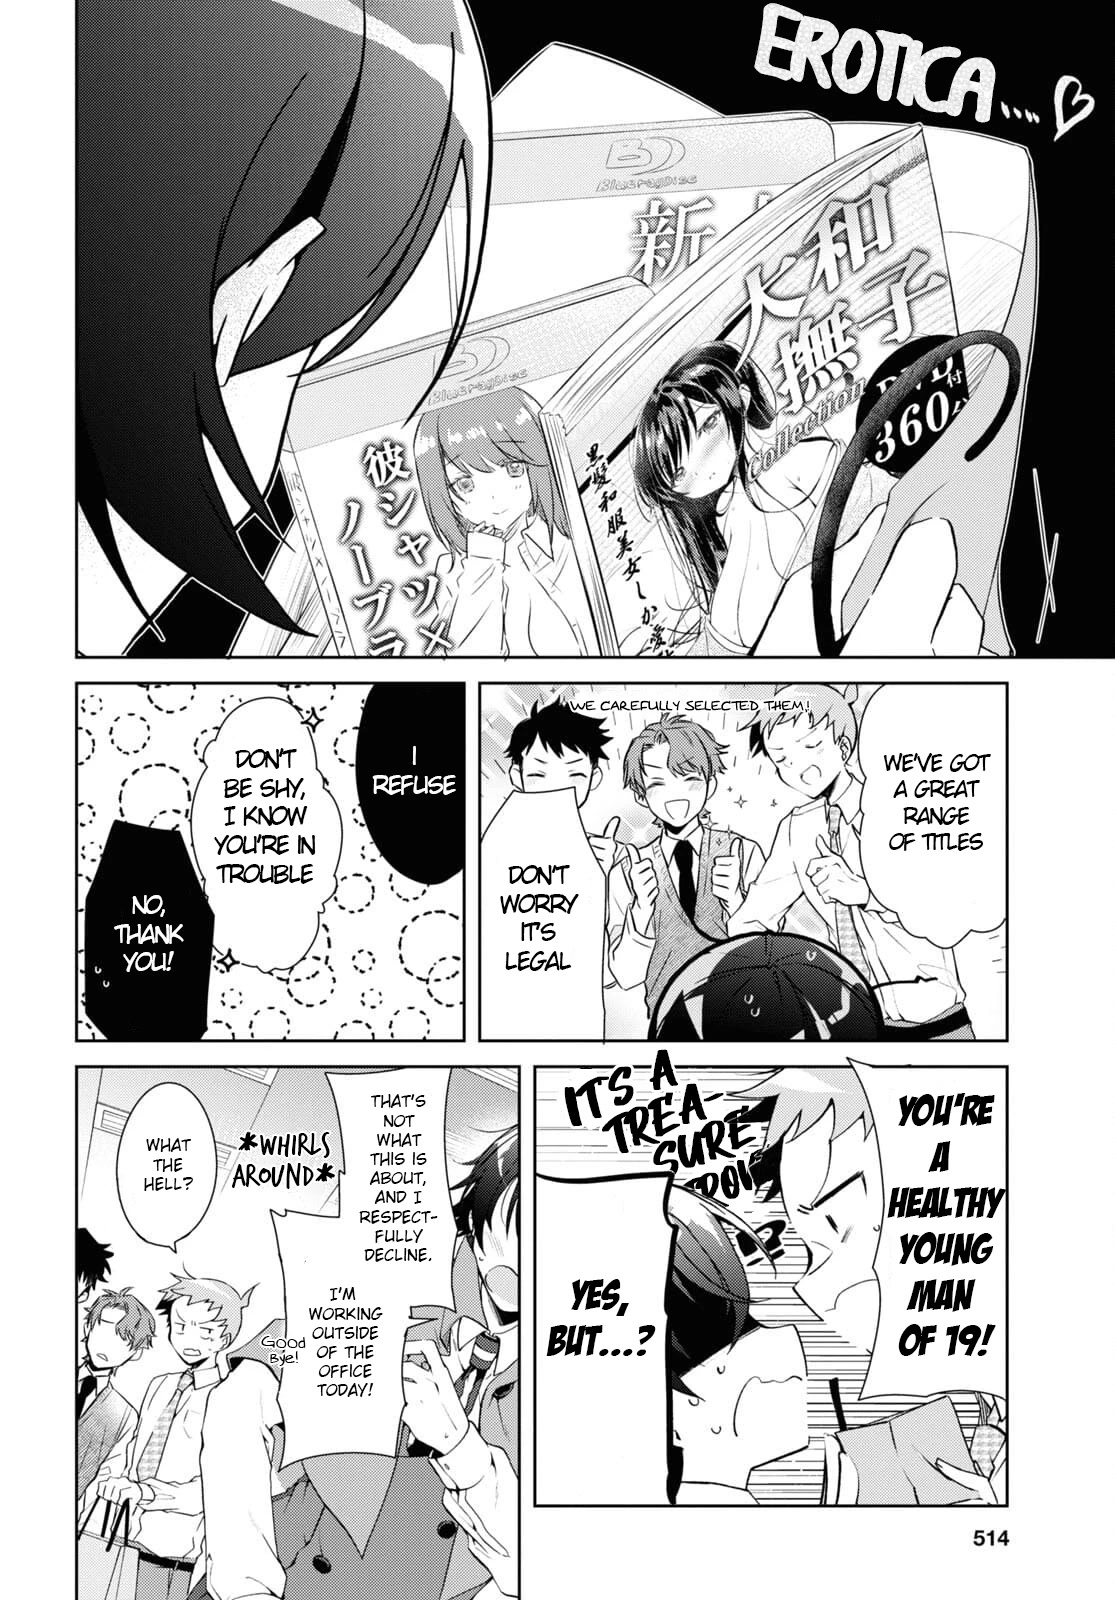 Isshiki-san Wants to Know About Love. - chapter 14 - #6